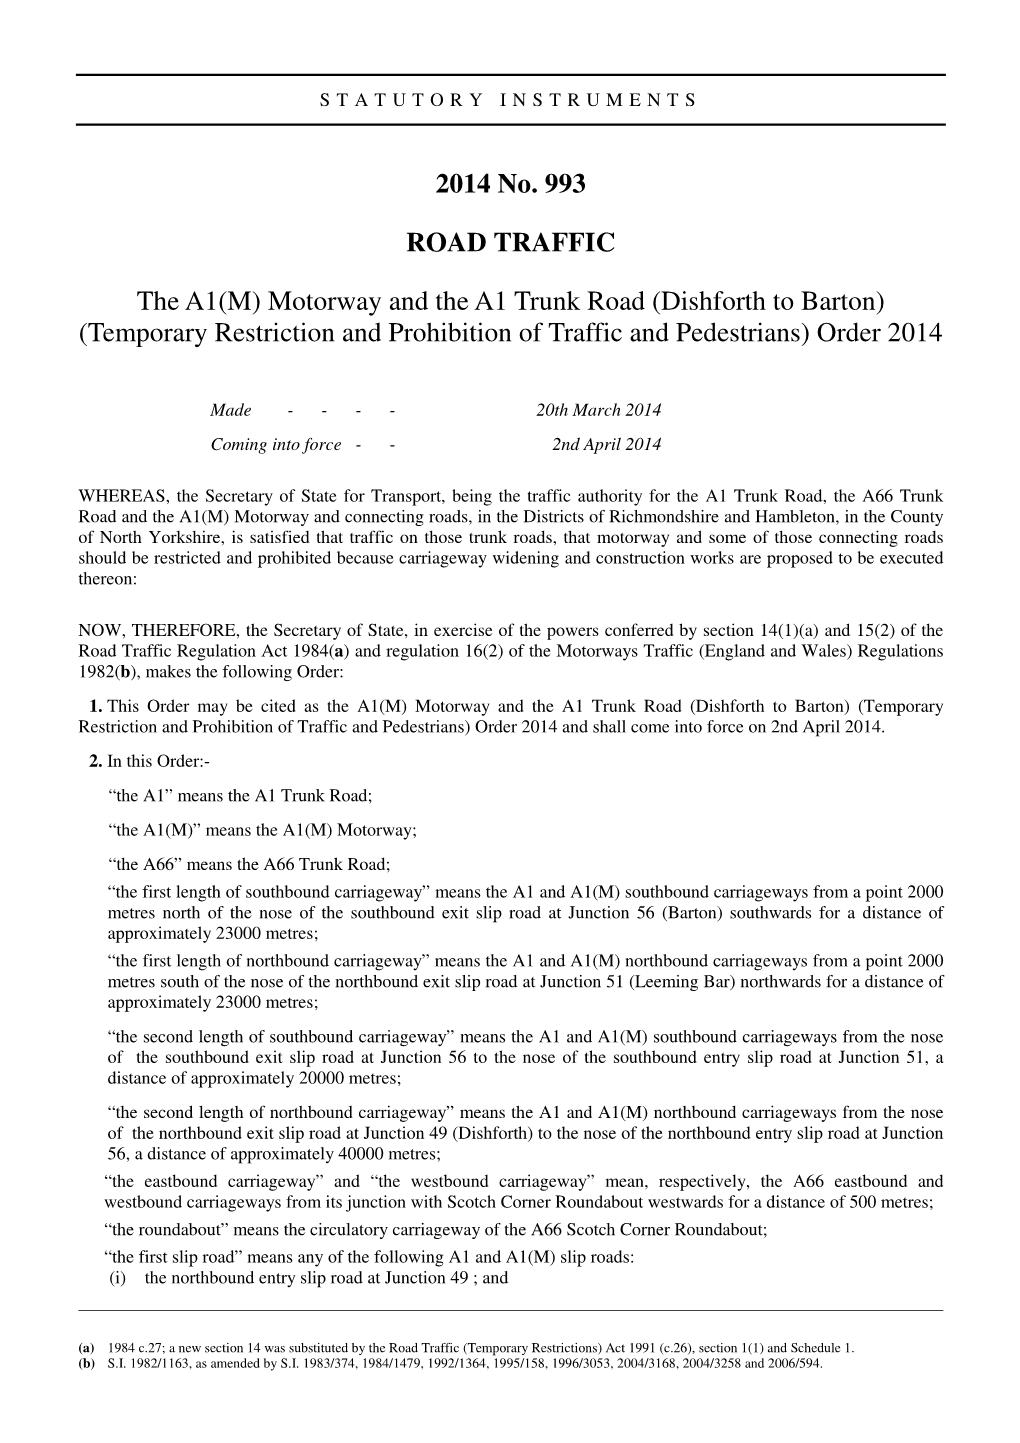 The A1(M) Motorway and the A1 Trunk Road (Dishforth to Barton) (Temporary Restriction and Prohibition of Traffic and Pedestrians) Order 2014